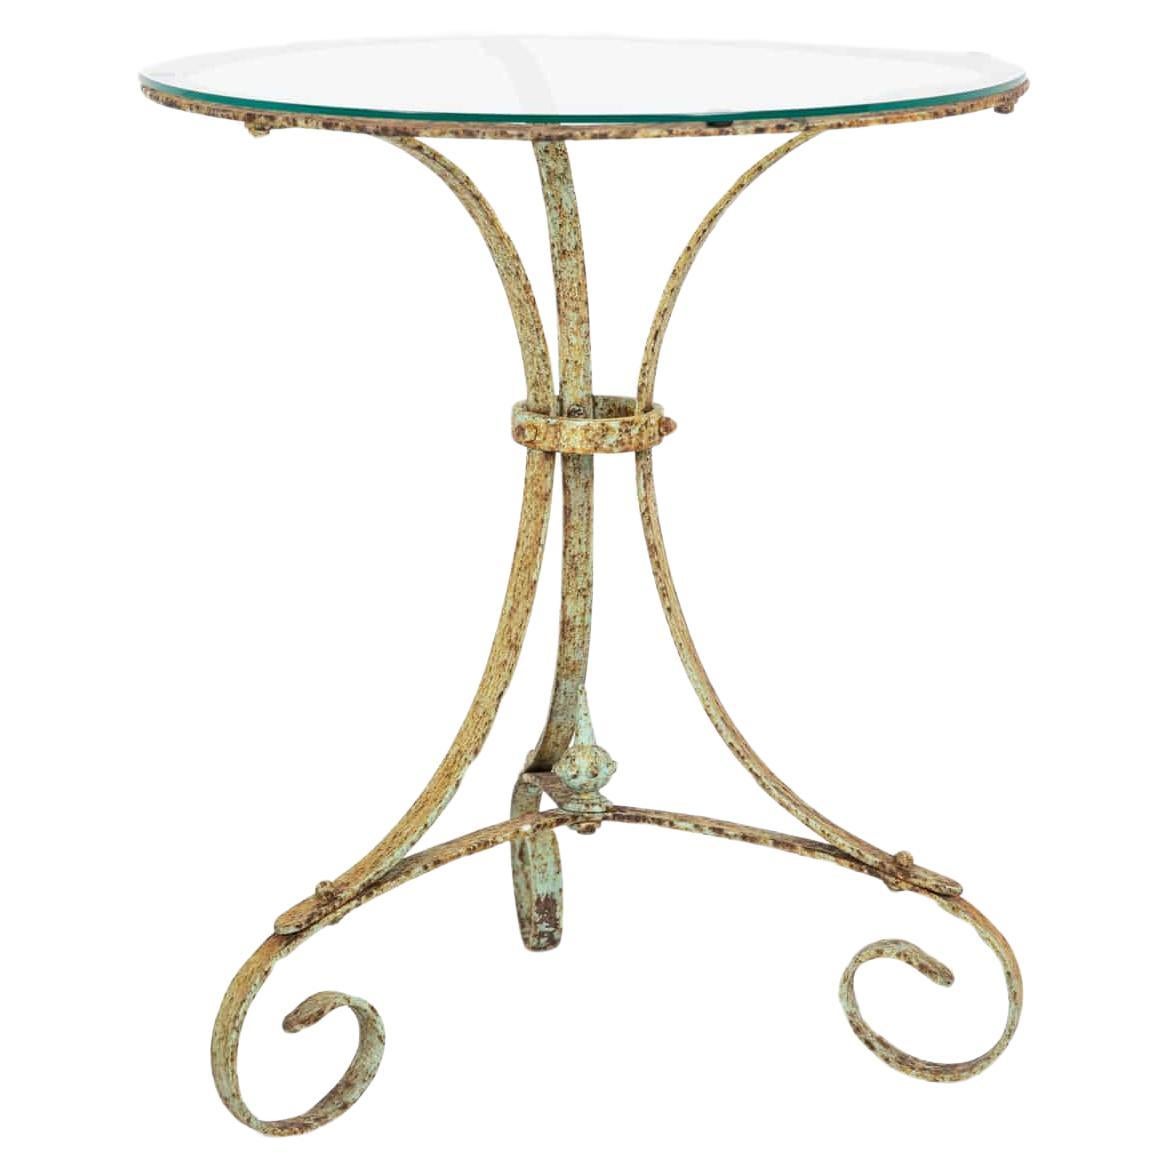 Antique Painted Wrought Iron Strapwork Garden Table Glazed Top. c.1940